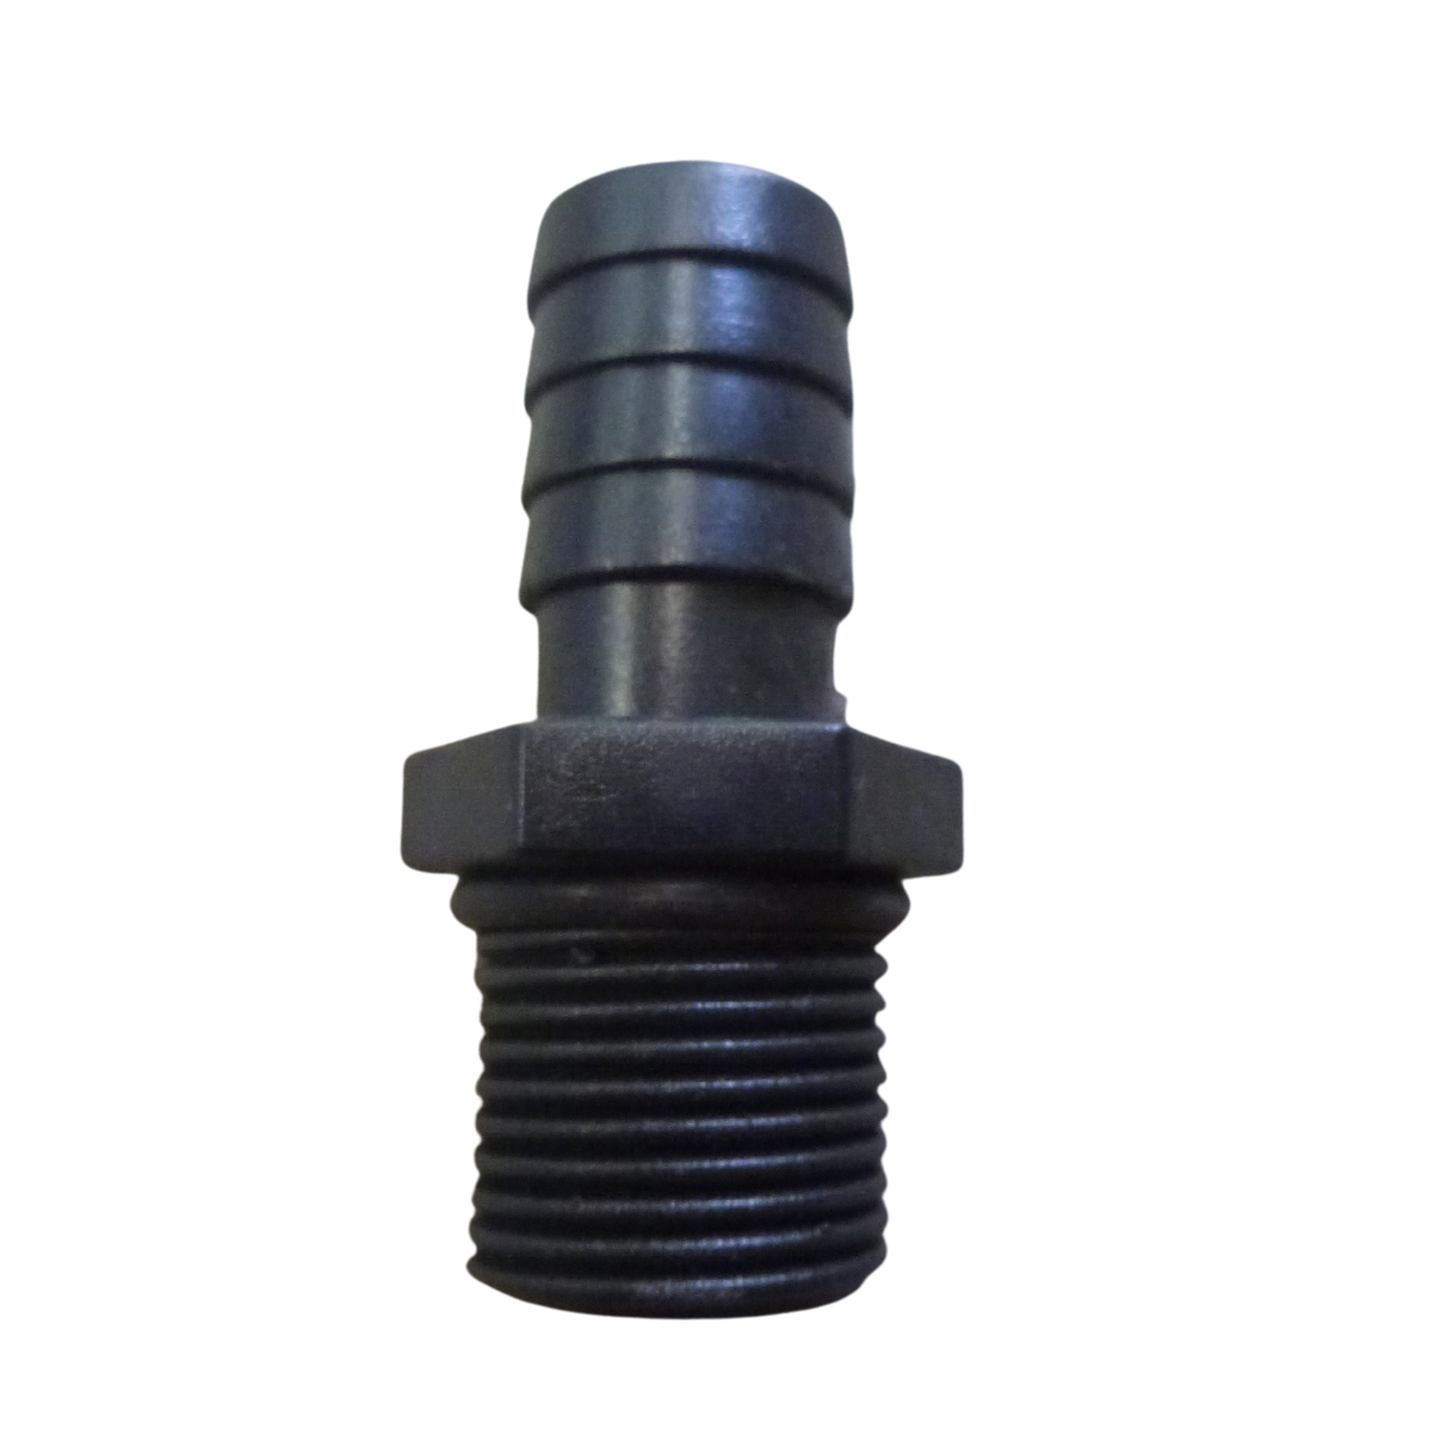 Adapter 3/8" Male Pipe Thread x 1/2" Male Barb